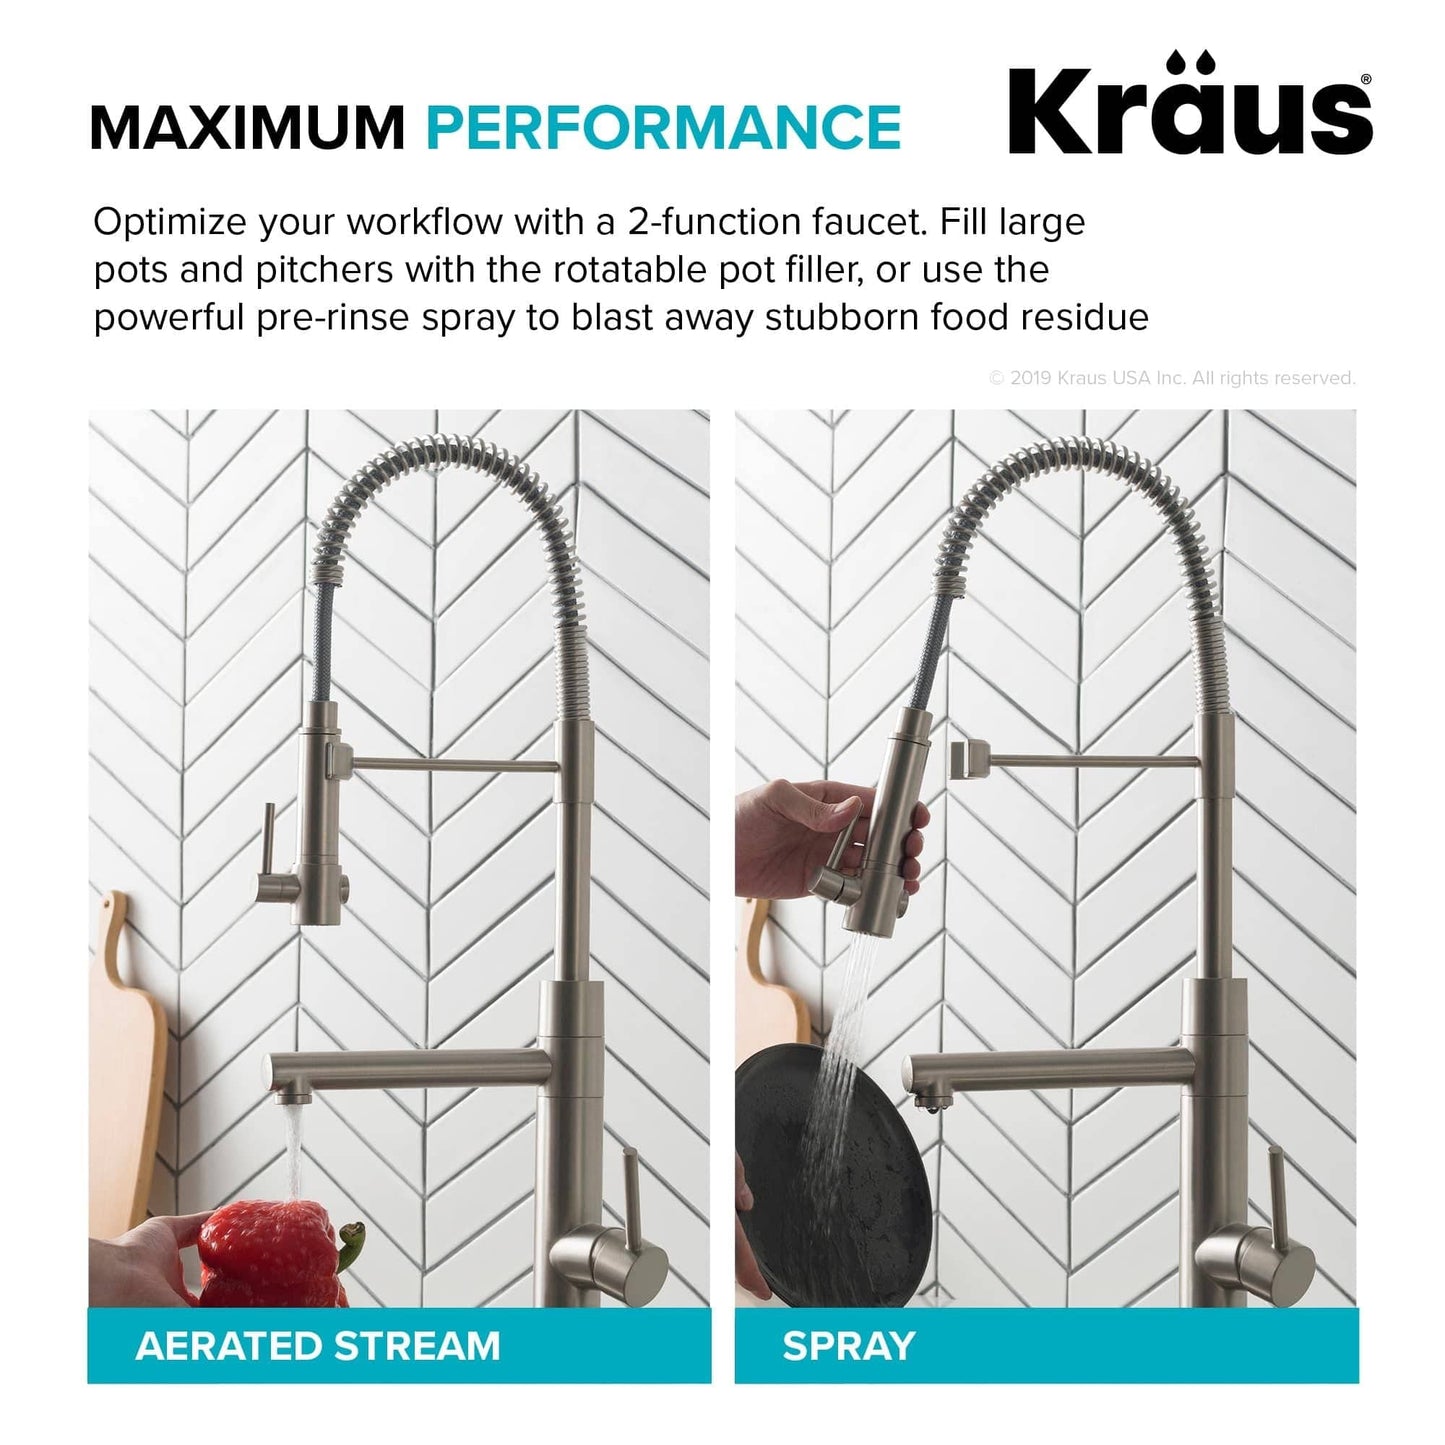 Kraus 24.75" Artec Pro Commercial Style Pre-Rinse Kitchen Faucet in Spot Free Stainless Steel